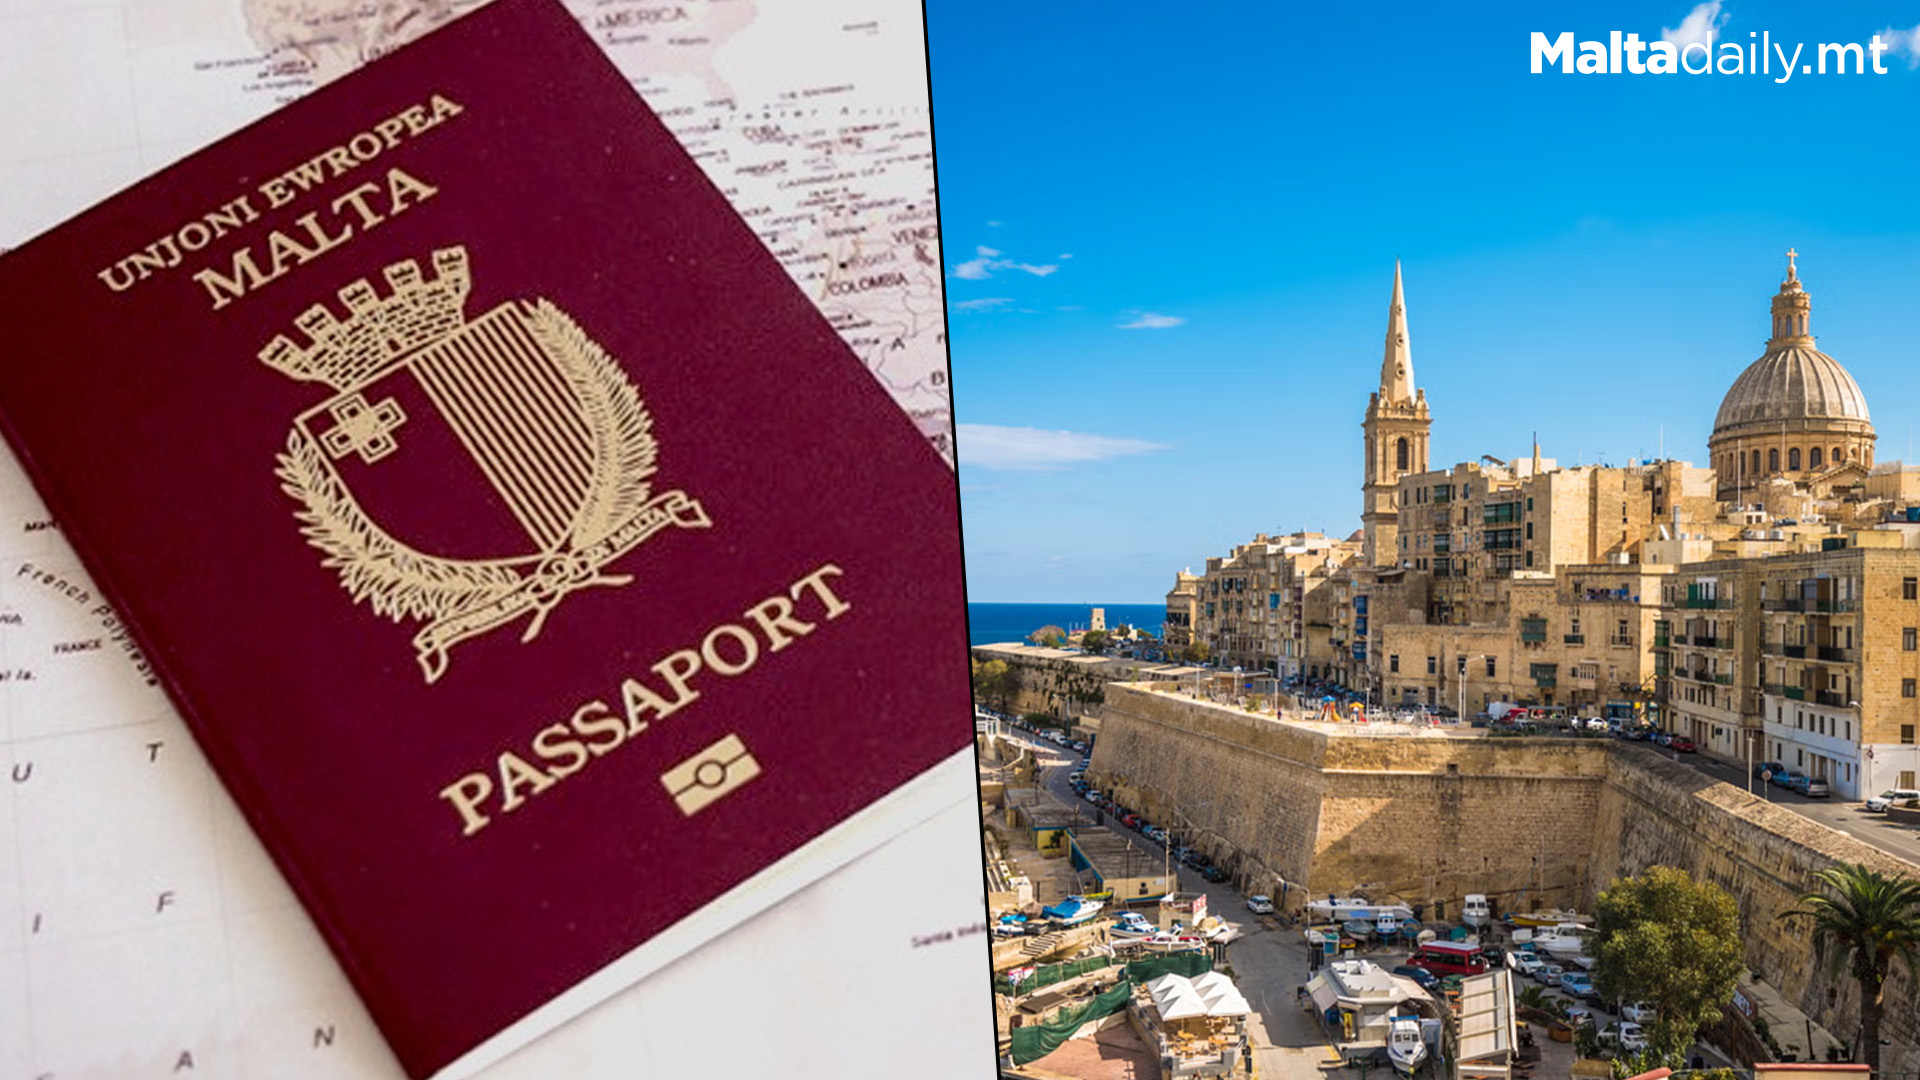 42.7% Of Under 25s Wish To Have NOT Been Born In Malta